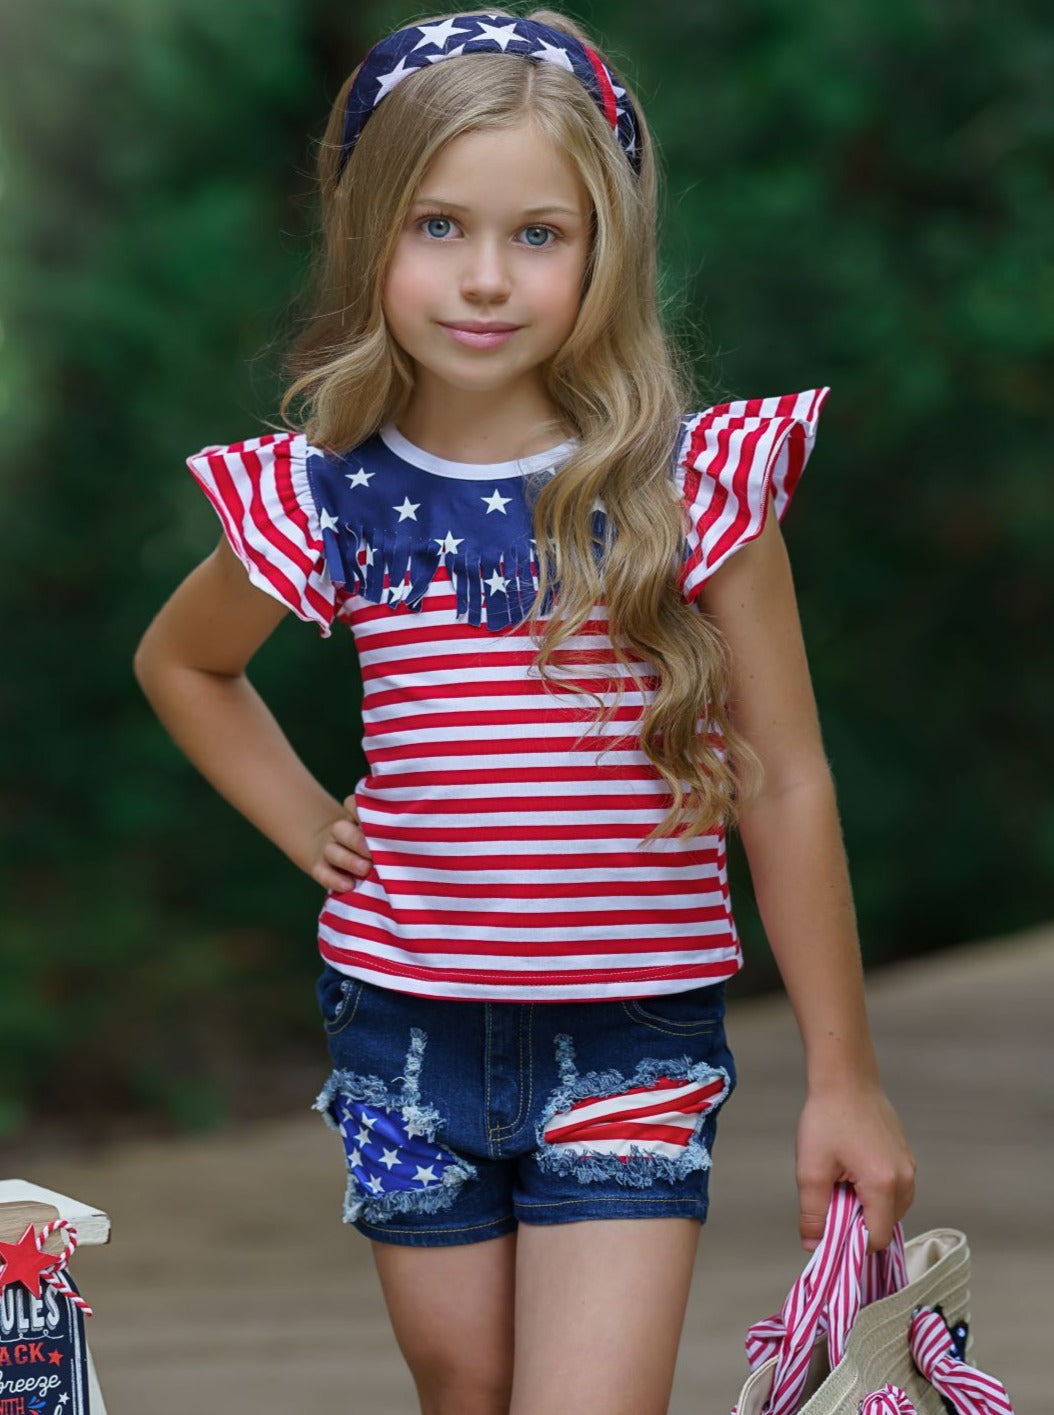 Girls 4th of July set features an American flag print flutter sleeve top with fringe neckline and patched denim shorts with a sash